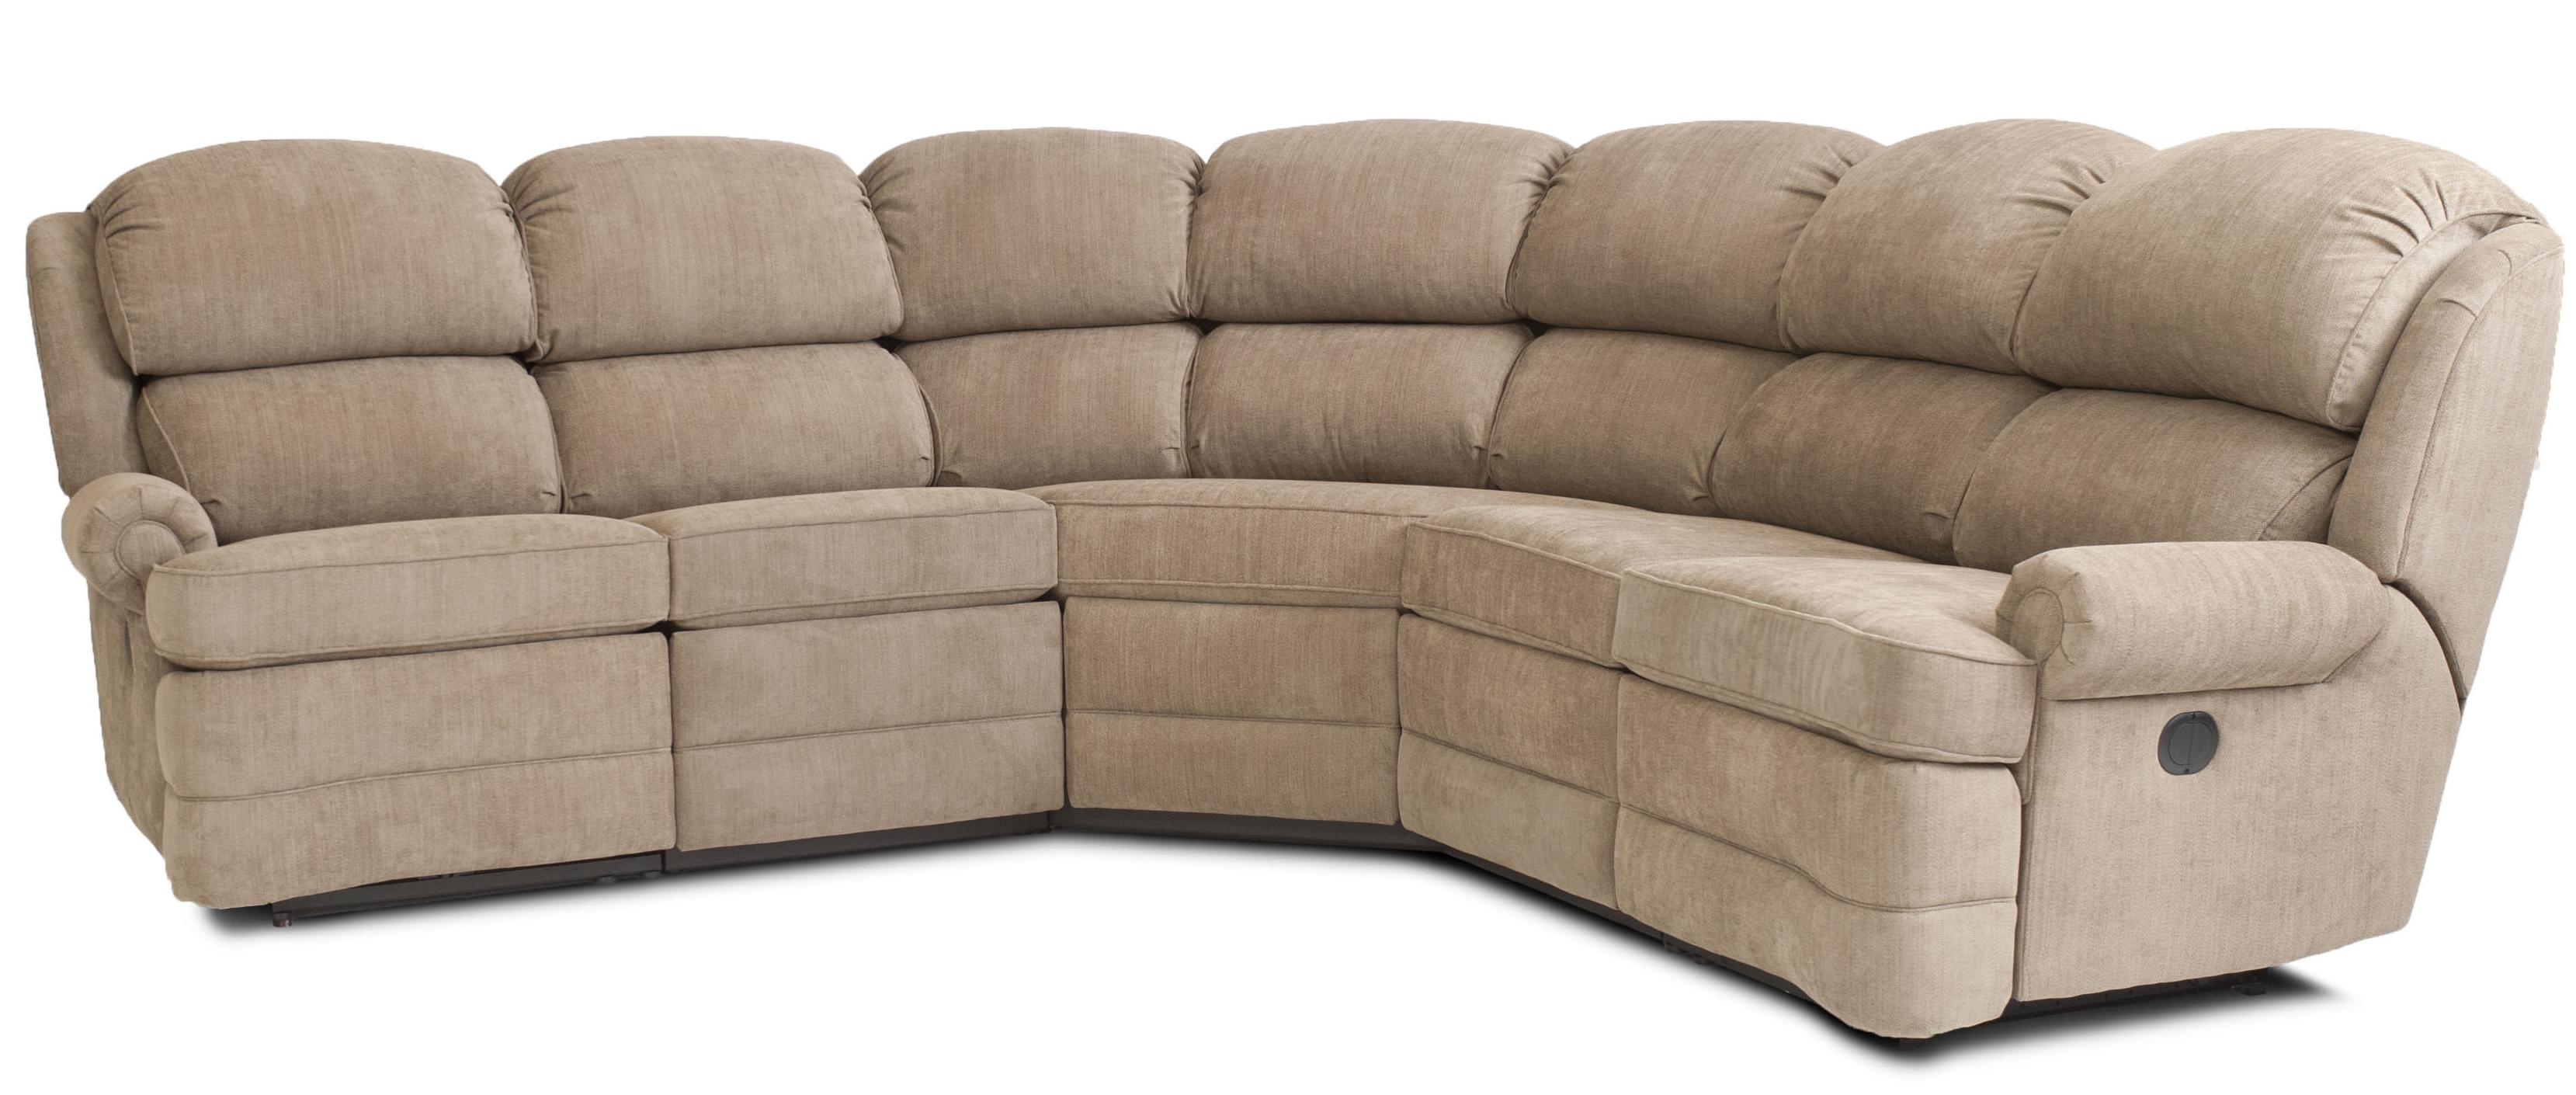 small sectional sofa with recliner photo - 6